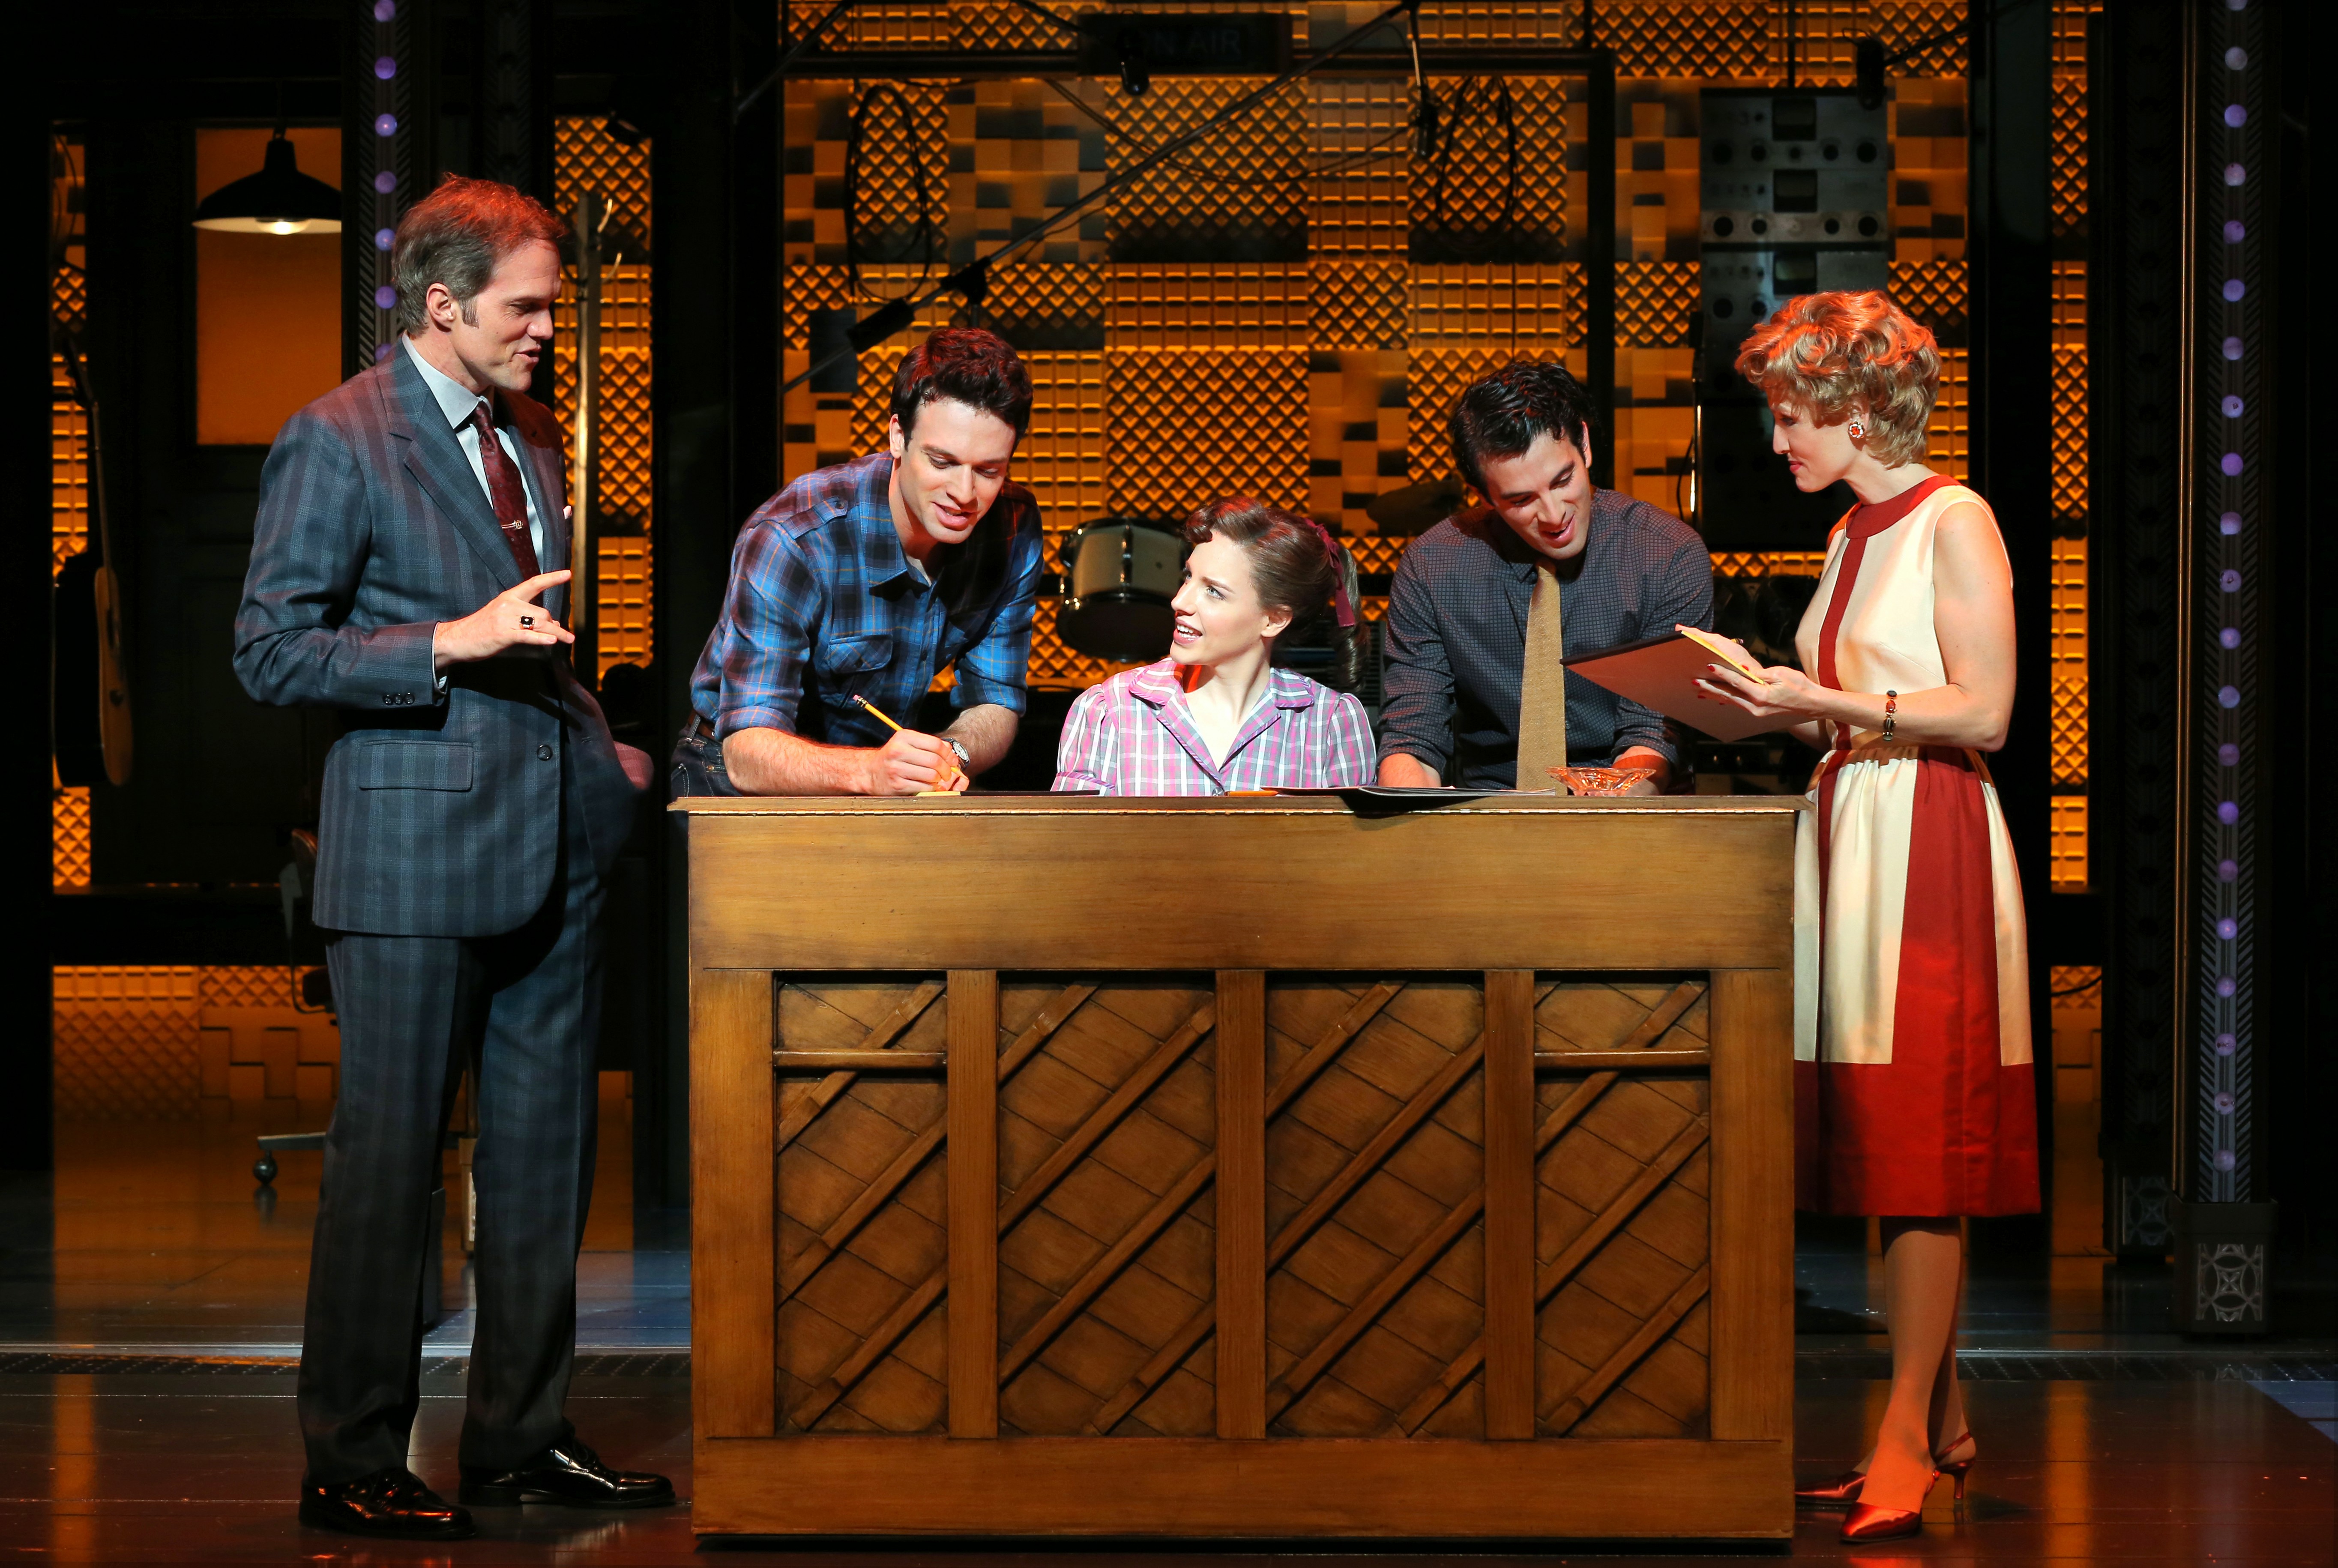 Broadway In Chicago Announces 2014 Tony® Winner BEAUTIFUL-The Carole King Musical To Play Oriental Theatre Dec. 1, 2015-Feb. 21, 2016 1 Broadway In Chicago and producers Paul Blake and Sony/ATV Music Publishing are thrilled to announce that the Tony Award-winning hit BEAUTIFUL—The Carole King Musical, about the early life and career of the legendary and groundbreaking singer/songwriter, will play Chicago’s Oriental Theatre (24 West Randolph) for an extended 12-week limited engagement December 1, 2015 through February 21, 2016.